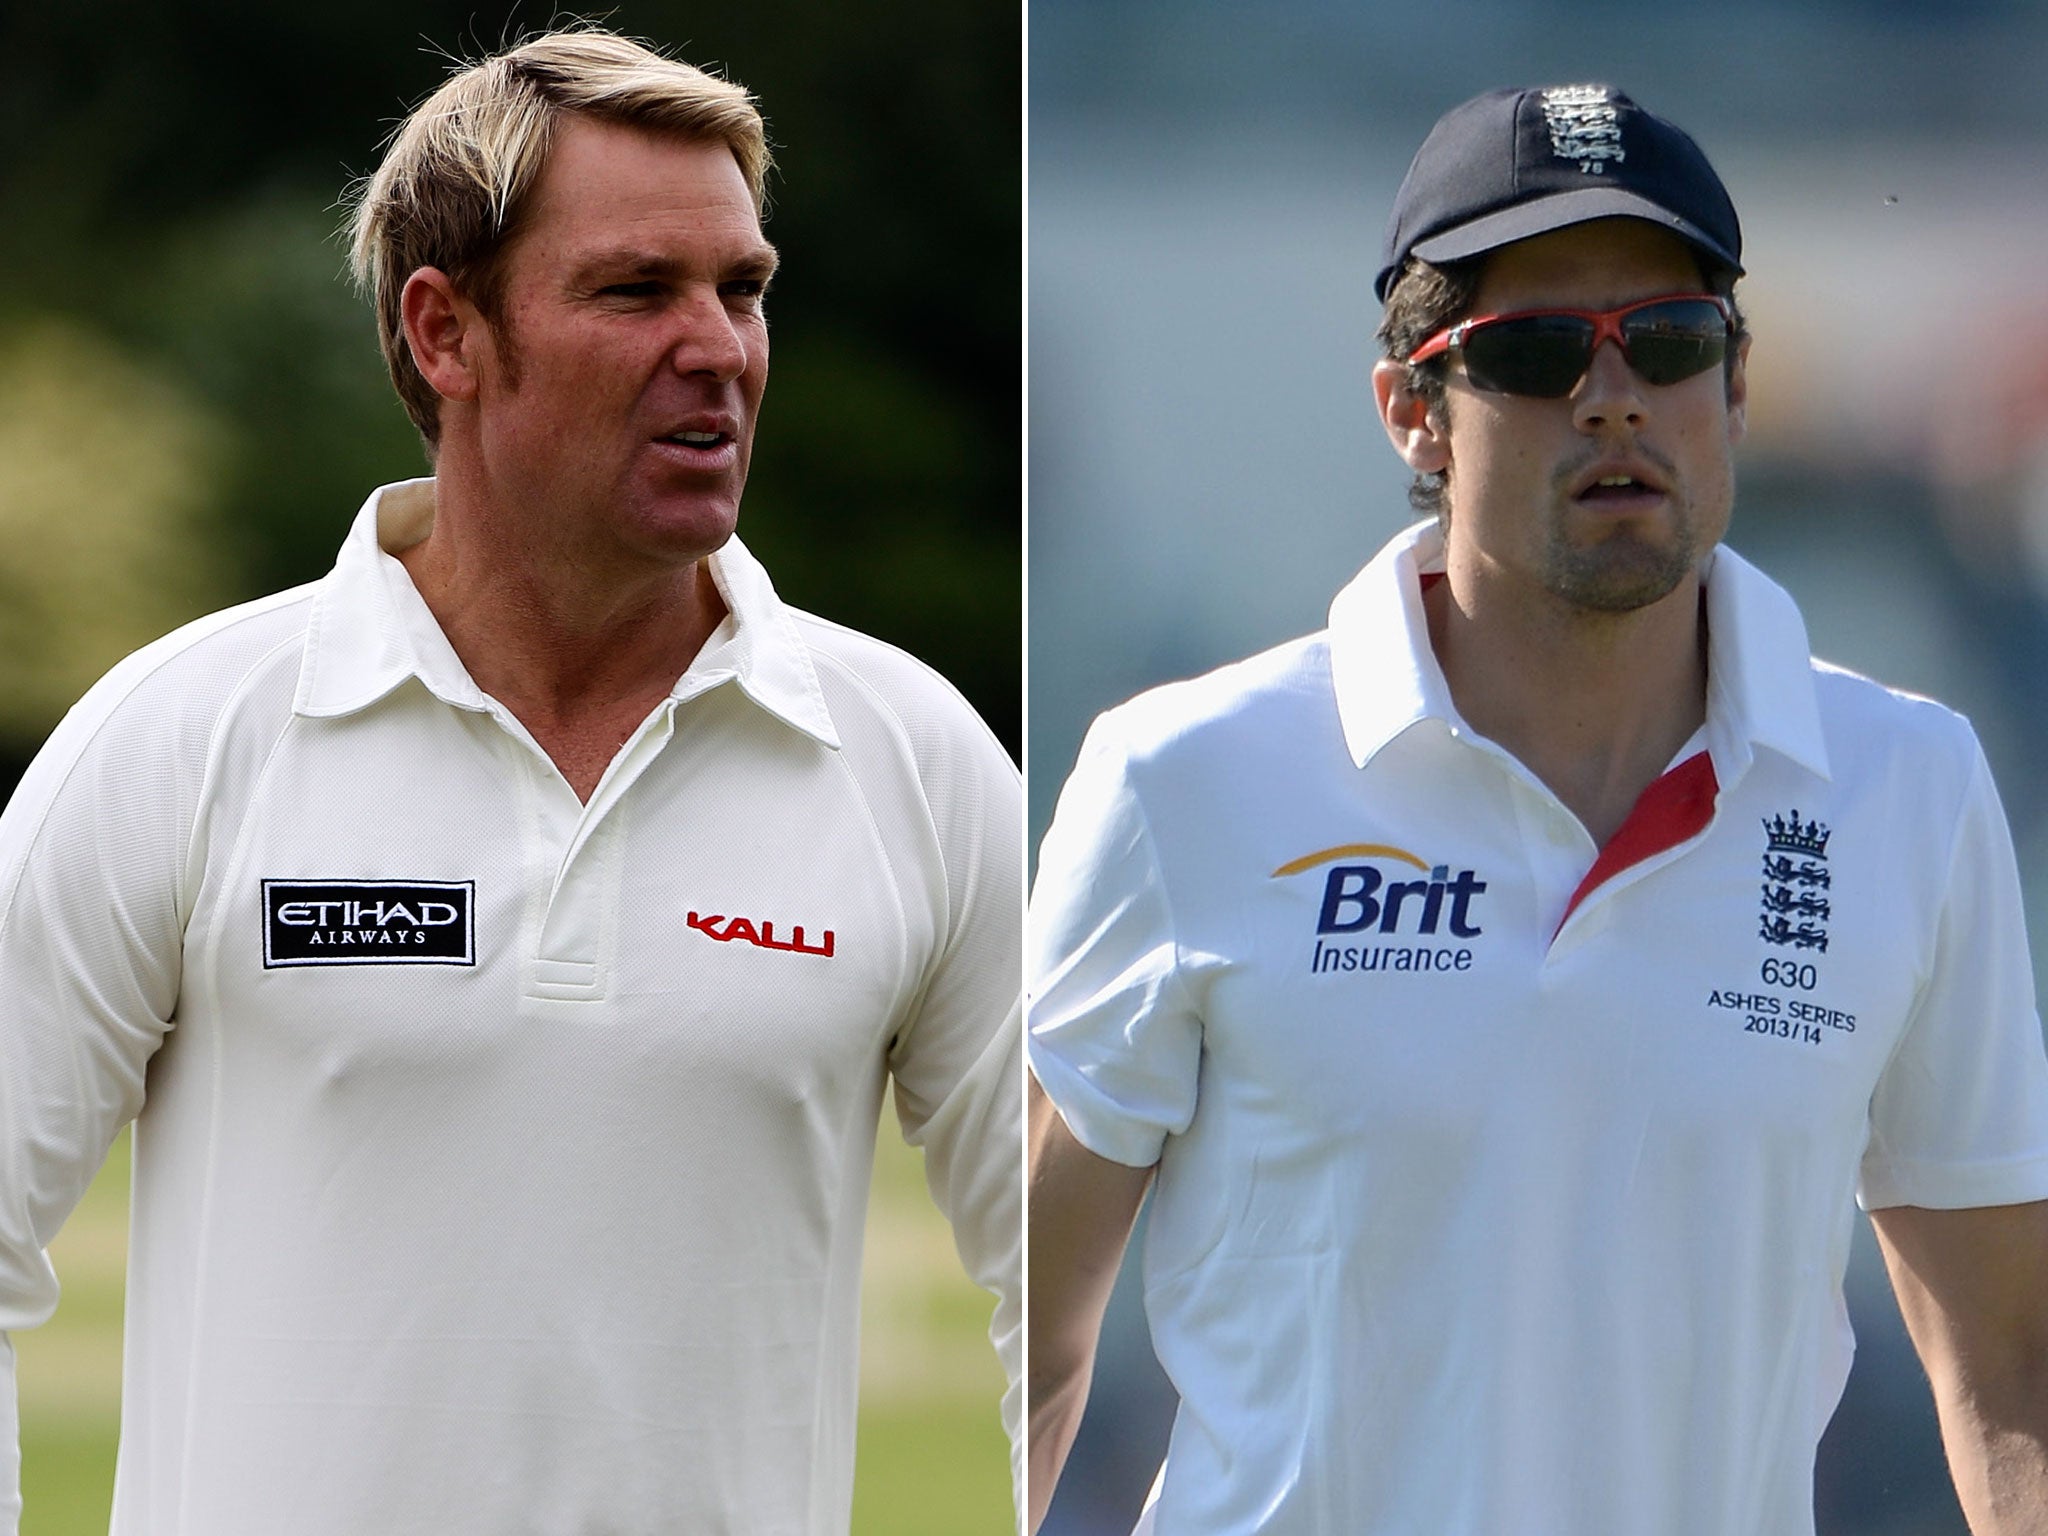 Shane Warne, left, said the conservative tactics of the England captain, Alastair Cook, right, could cost his team dear against Australia